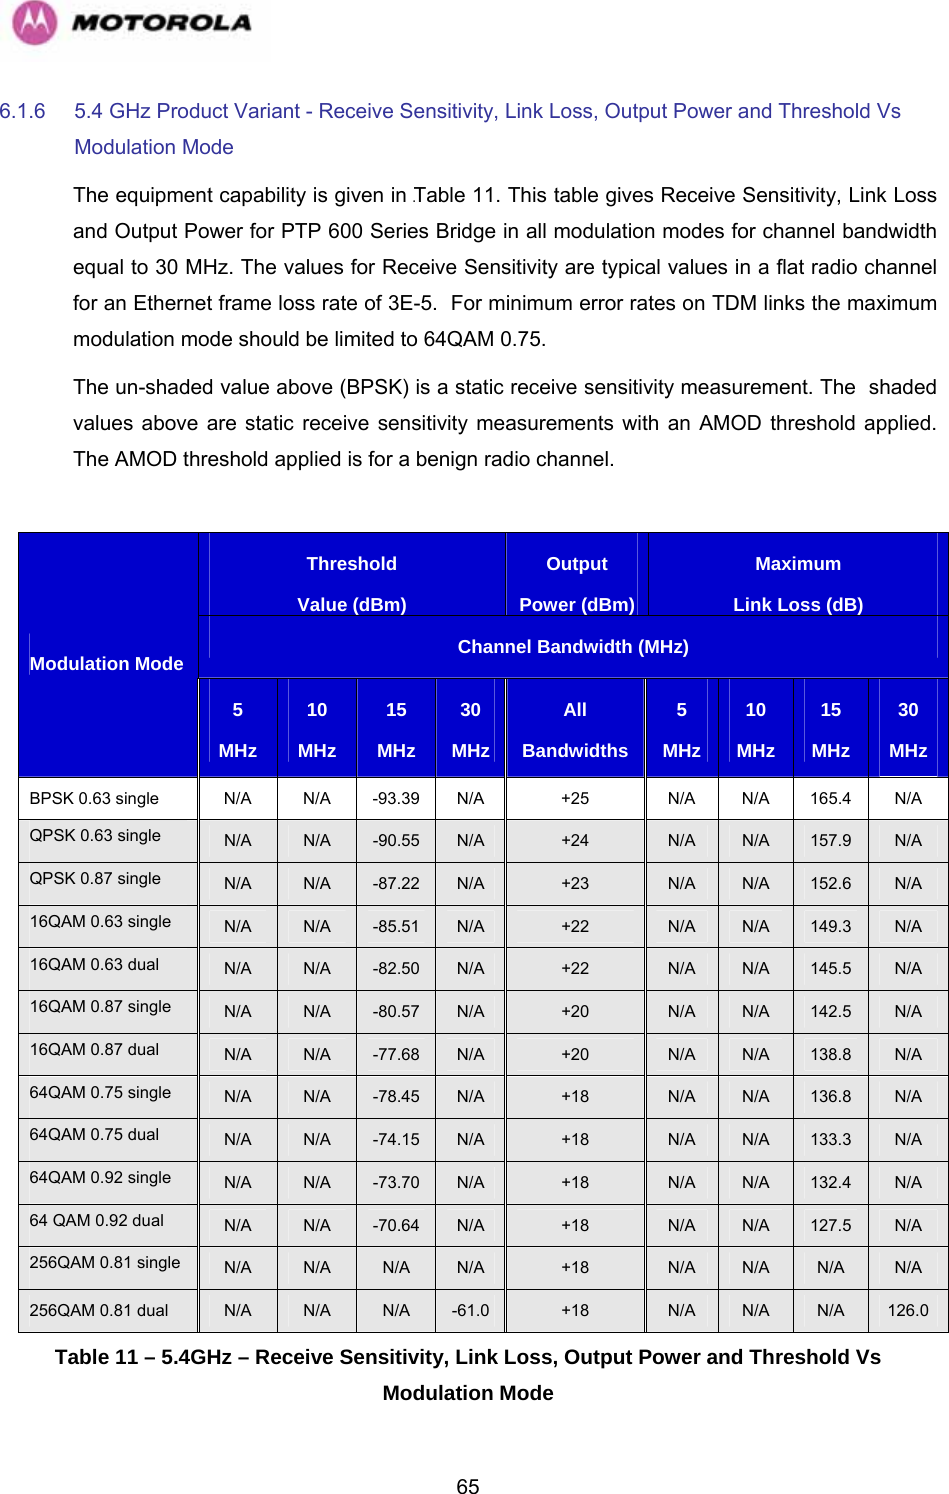   656.1.6  5.4 GHz Product Variant - Receive Sensitivity, Link Loss, Output Power and Threshold Vs Modulation Mode The equipment capability is given in 1022HTable 11. This table gives Receive Sensitivity, Link Loss and Output Power for PTP 600 Series Bridge in all modulation modes for channel bandwidth equal to 30 MHz. The values for Receive Sensitivity are typical values in a flat radio channel for an Ethernet frame loss rate of 3E-5.  For minimum error rates on TDM links the maximum modulation mode should be limited to 64QAM 0.75. The un-shaded value above (BPSK) is a static receive sensitivity measurement. The  shaded values above are static receive sensitivity measurements with an AMOD threshold applied. The AMOD threshold applied is for a benign radio channel.  Threshold Value (dBm)Output Power (dBm)Maximum Link Loss (dB)Channel Bandwidth (MHz) Modulation Mode 5 MHz 10 MHz 15 MHz 30 MHz All  Bandwidths 5 MHz 10 MHz 15 MHz 30 MHz BPSK 0.63 single  N/A  N/A  -93.39  N/A  +25  N/A  N/A  165.4  N/A QPSK 0.63 single  N/A  N/A  -90.55  N/A  +24  N/A  N/A  157.9  N/A QPSK 0.87 single  N/A  N/A  -87.22  N/A  +23  N/A  N/A  152.6  N/A 16QAM 0.63 single  N/A  N/A  -85.51  N/A  +22  N/A  N/A  149.3  N/A 16QAM 0.63 dual  N/A  N/A  -82.50  N/A  +22  N/A  N/A  145.5  N/A 16QAM 0.87 single  N/A  N/A  -80.57  N/A  +20  N/A  N/A  142.5  N/A 16QAM 0.87 dual  N/A  N/A  -77.68  N/A  +20  N/A  N/A  138.8  N/A 64QAM 0.75 single  N/A  N/A  -78.45  N/A  +18  N/A  N/A  136.8  N/A 64QAM 0.75 dual  N/A  N/A  -74.15  N/A  +18  N/A  N/A  133.3  N/A 64QAM 0.92 single  N/A  N/A  -73.70  N/A  +18  N/A  N/A  132.4  N/A 64 QAM 0.92 dual  N/A  N/A  -70.64  N/A  +18  N/A  N/A  127.5  N/A 256QAM 0.81 single  N/A  N/A  N/A  N/A  +18  N/A  N/A  N/A  N/A 256QAM 0.81 dual  N/A  N/A  N/A  -61.0  +18  N/A  N/A  N/A  126.0 Table 11 – 5.4GHz – Receive Sensitivity, Link Loss, Output Power and Threshold Vs Modulation Mode 